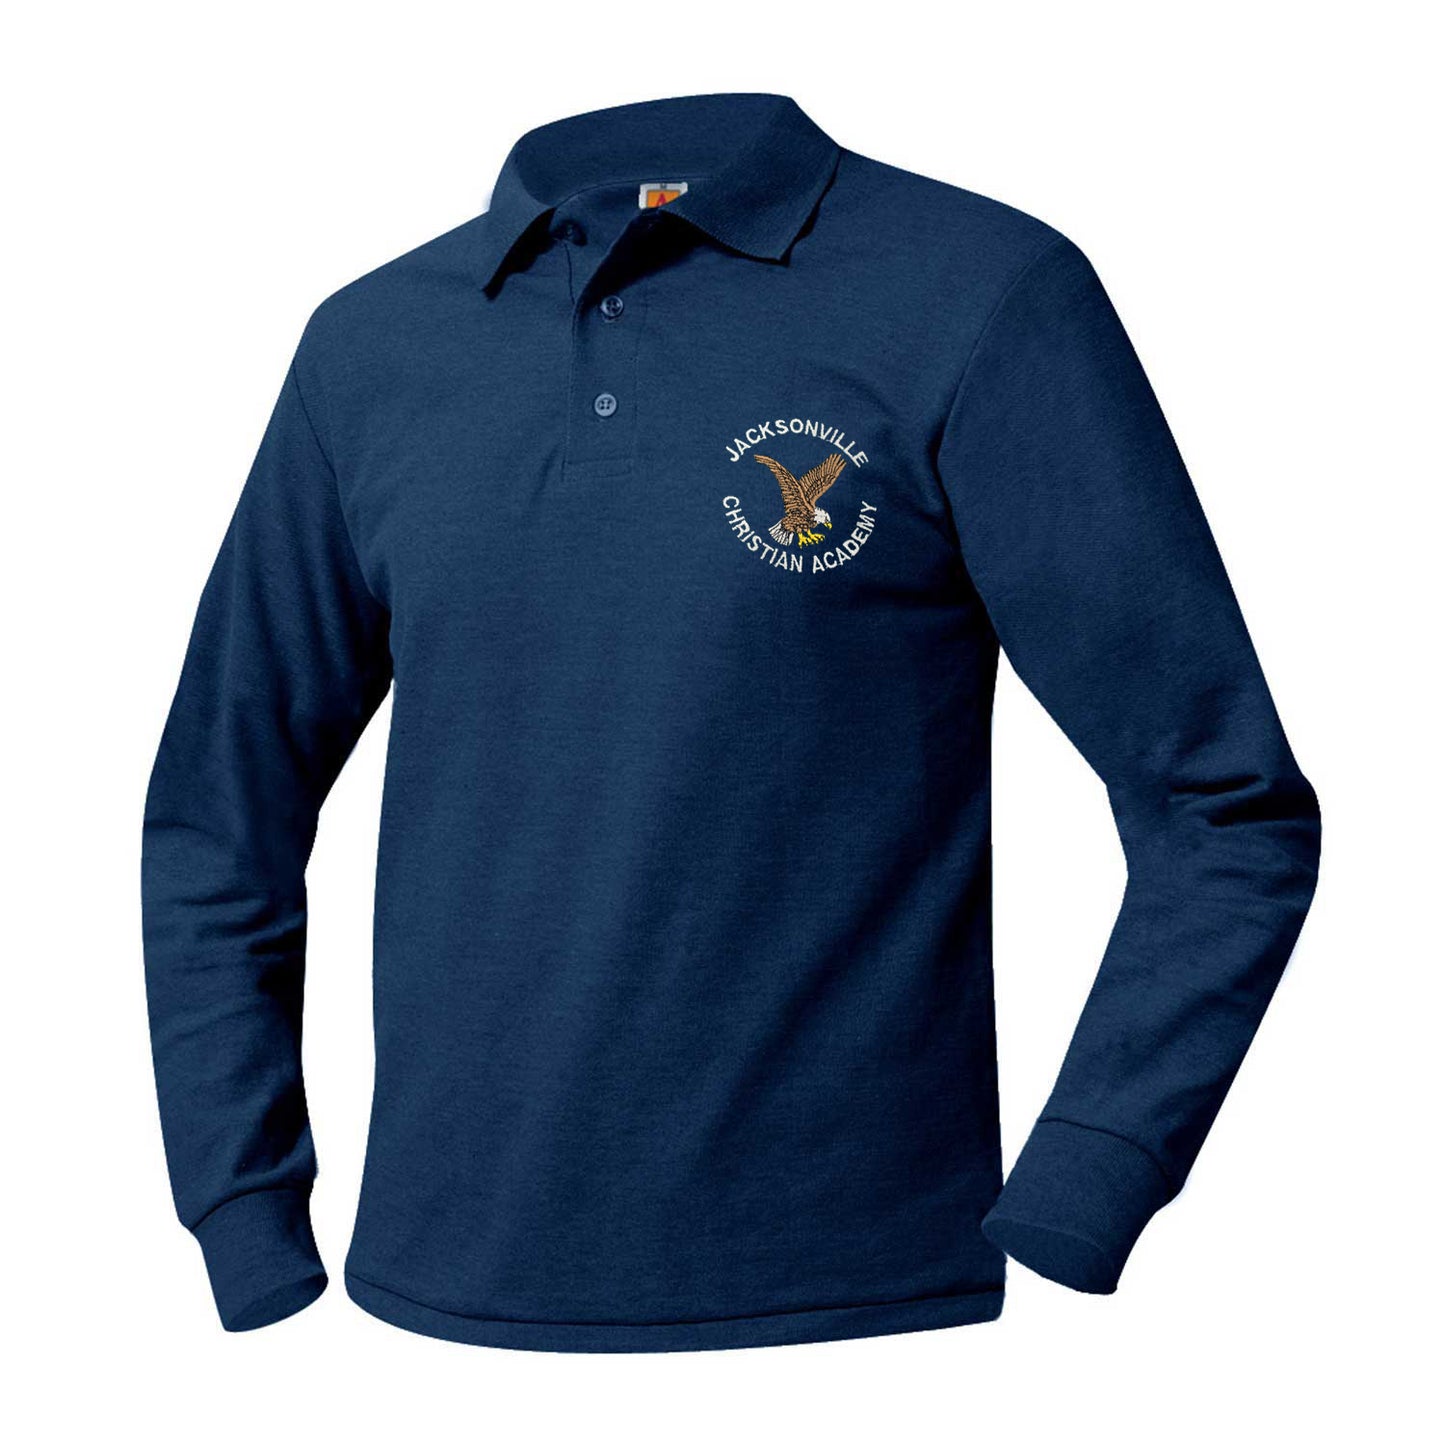 Adult Long Sleeve Pique Polo With Jacksonville Christian Logo